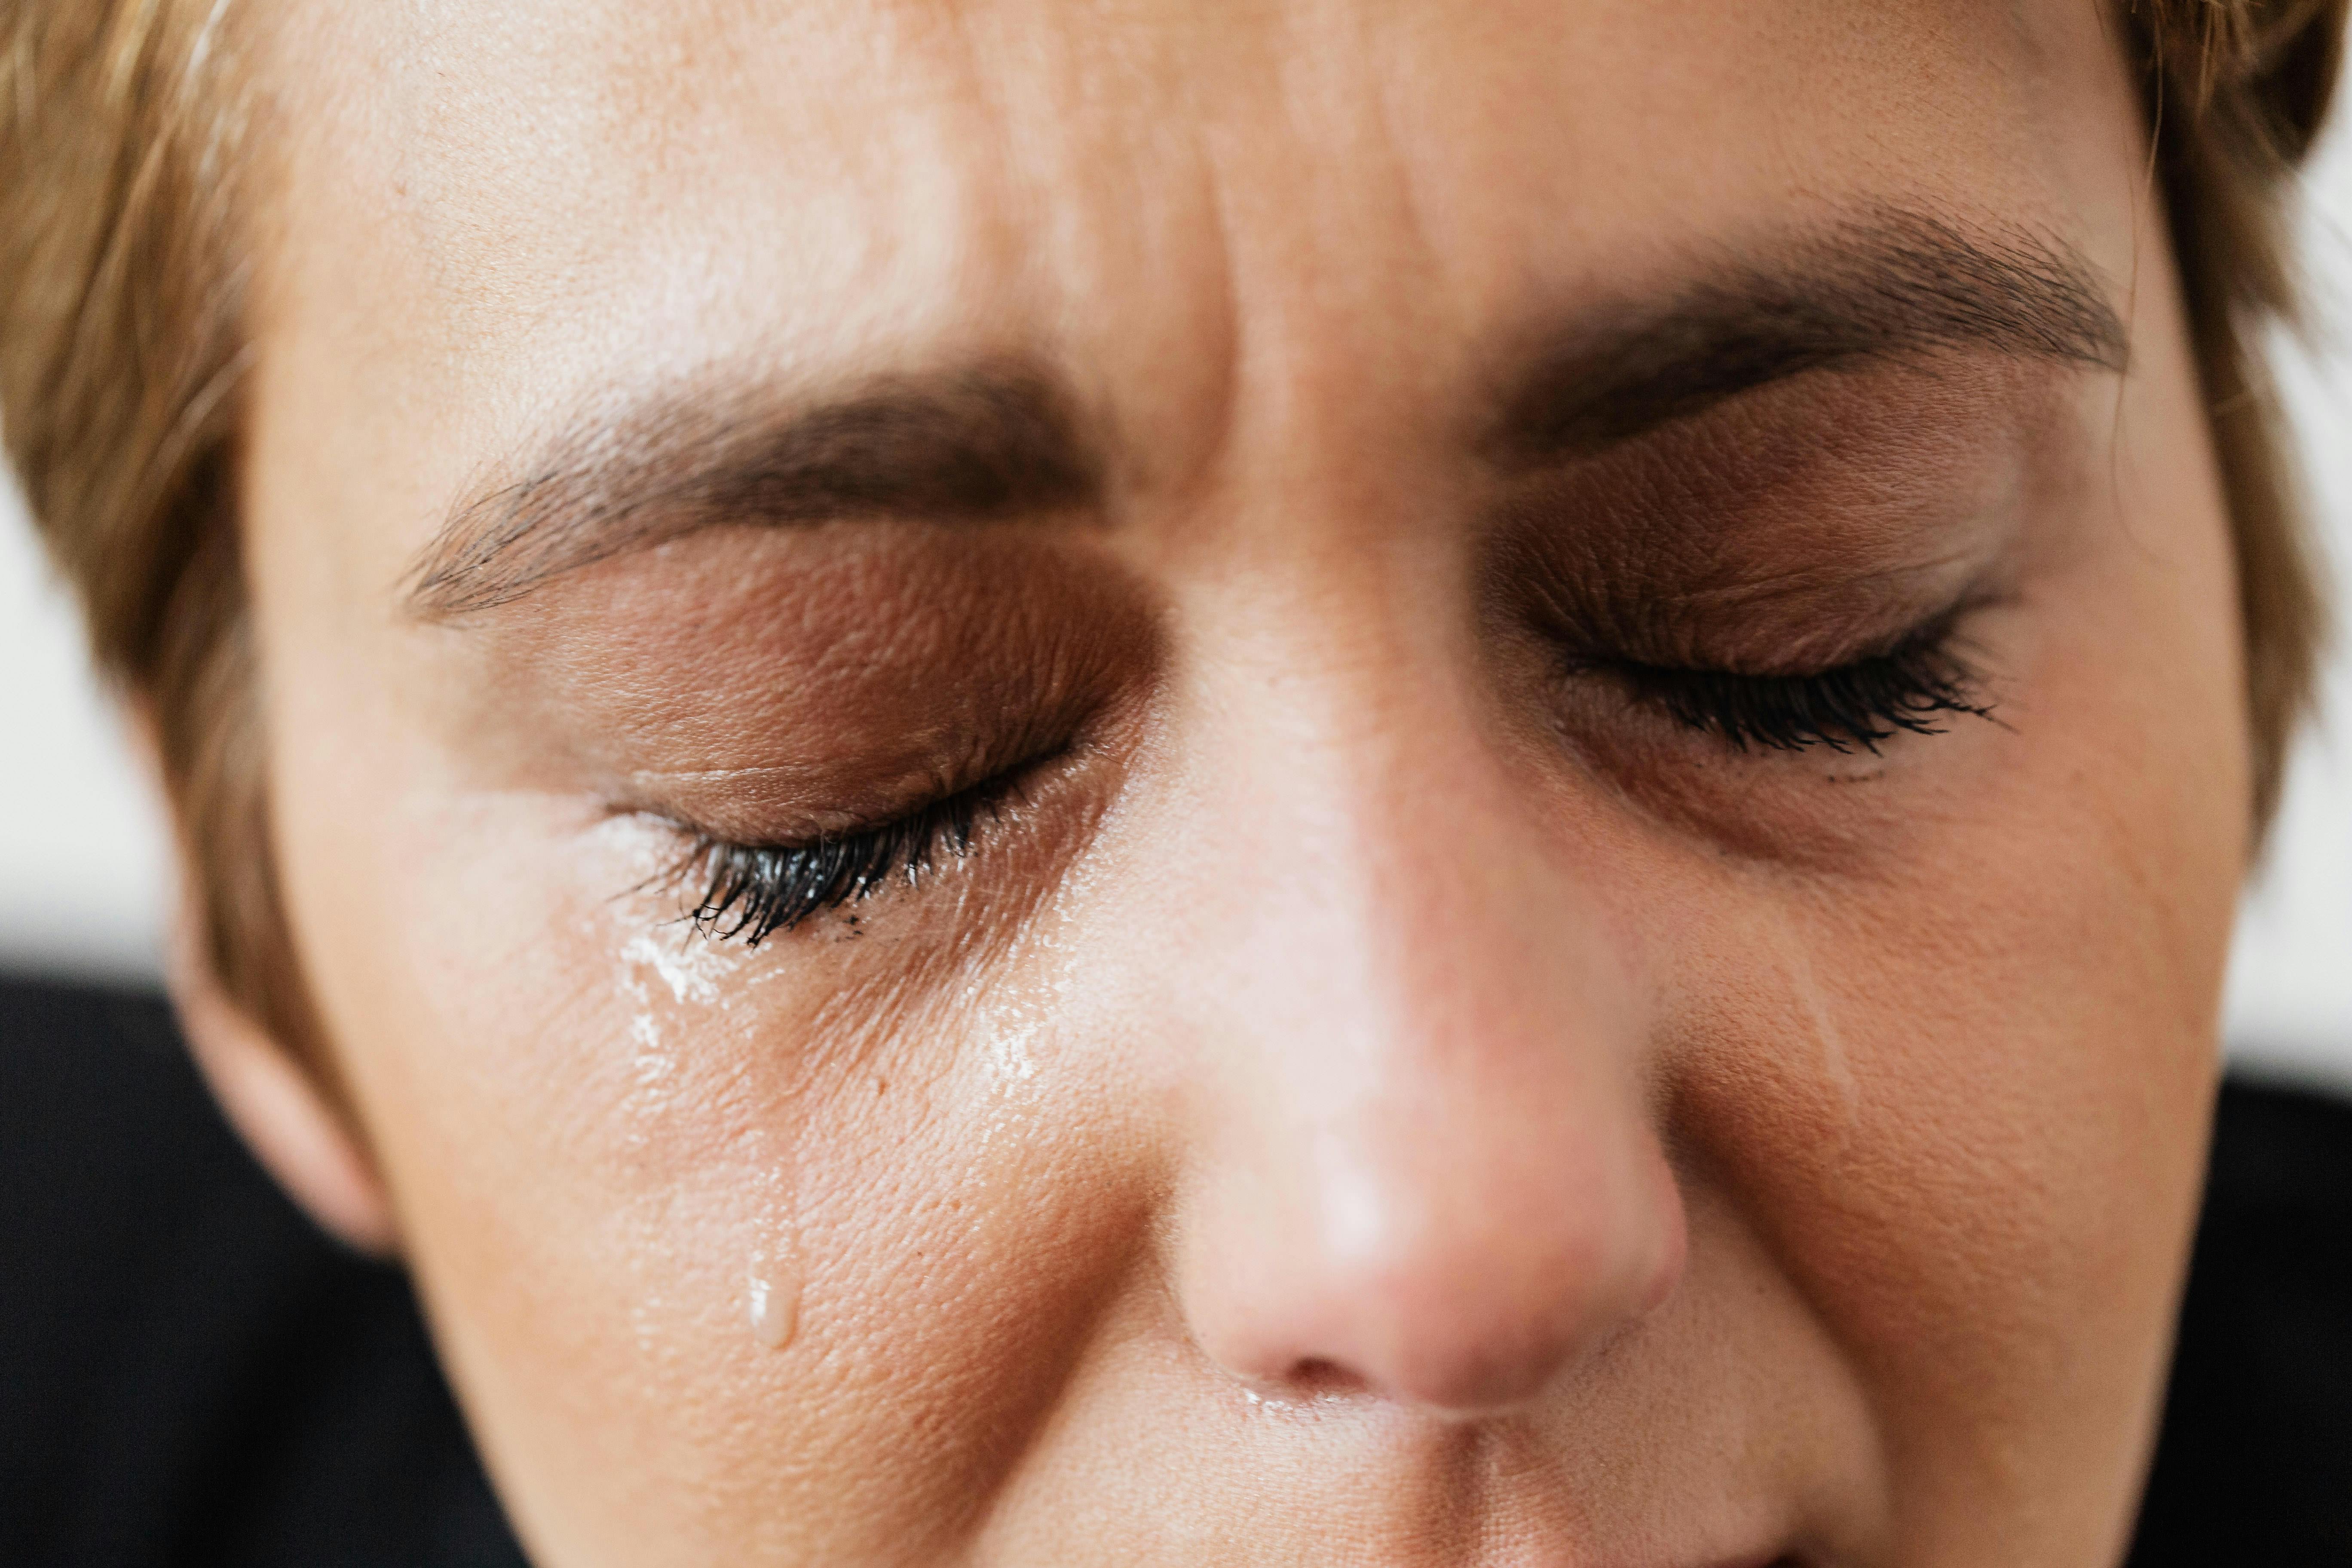 A close-up of a woman with tears on her face | Source: Pexels